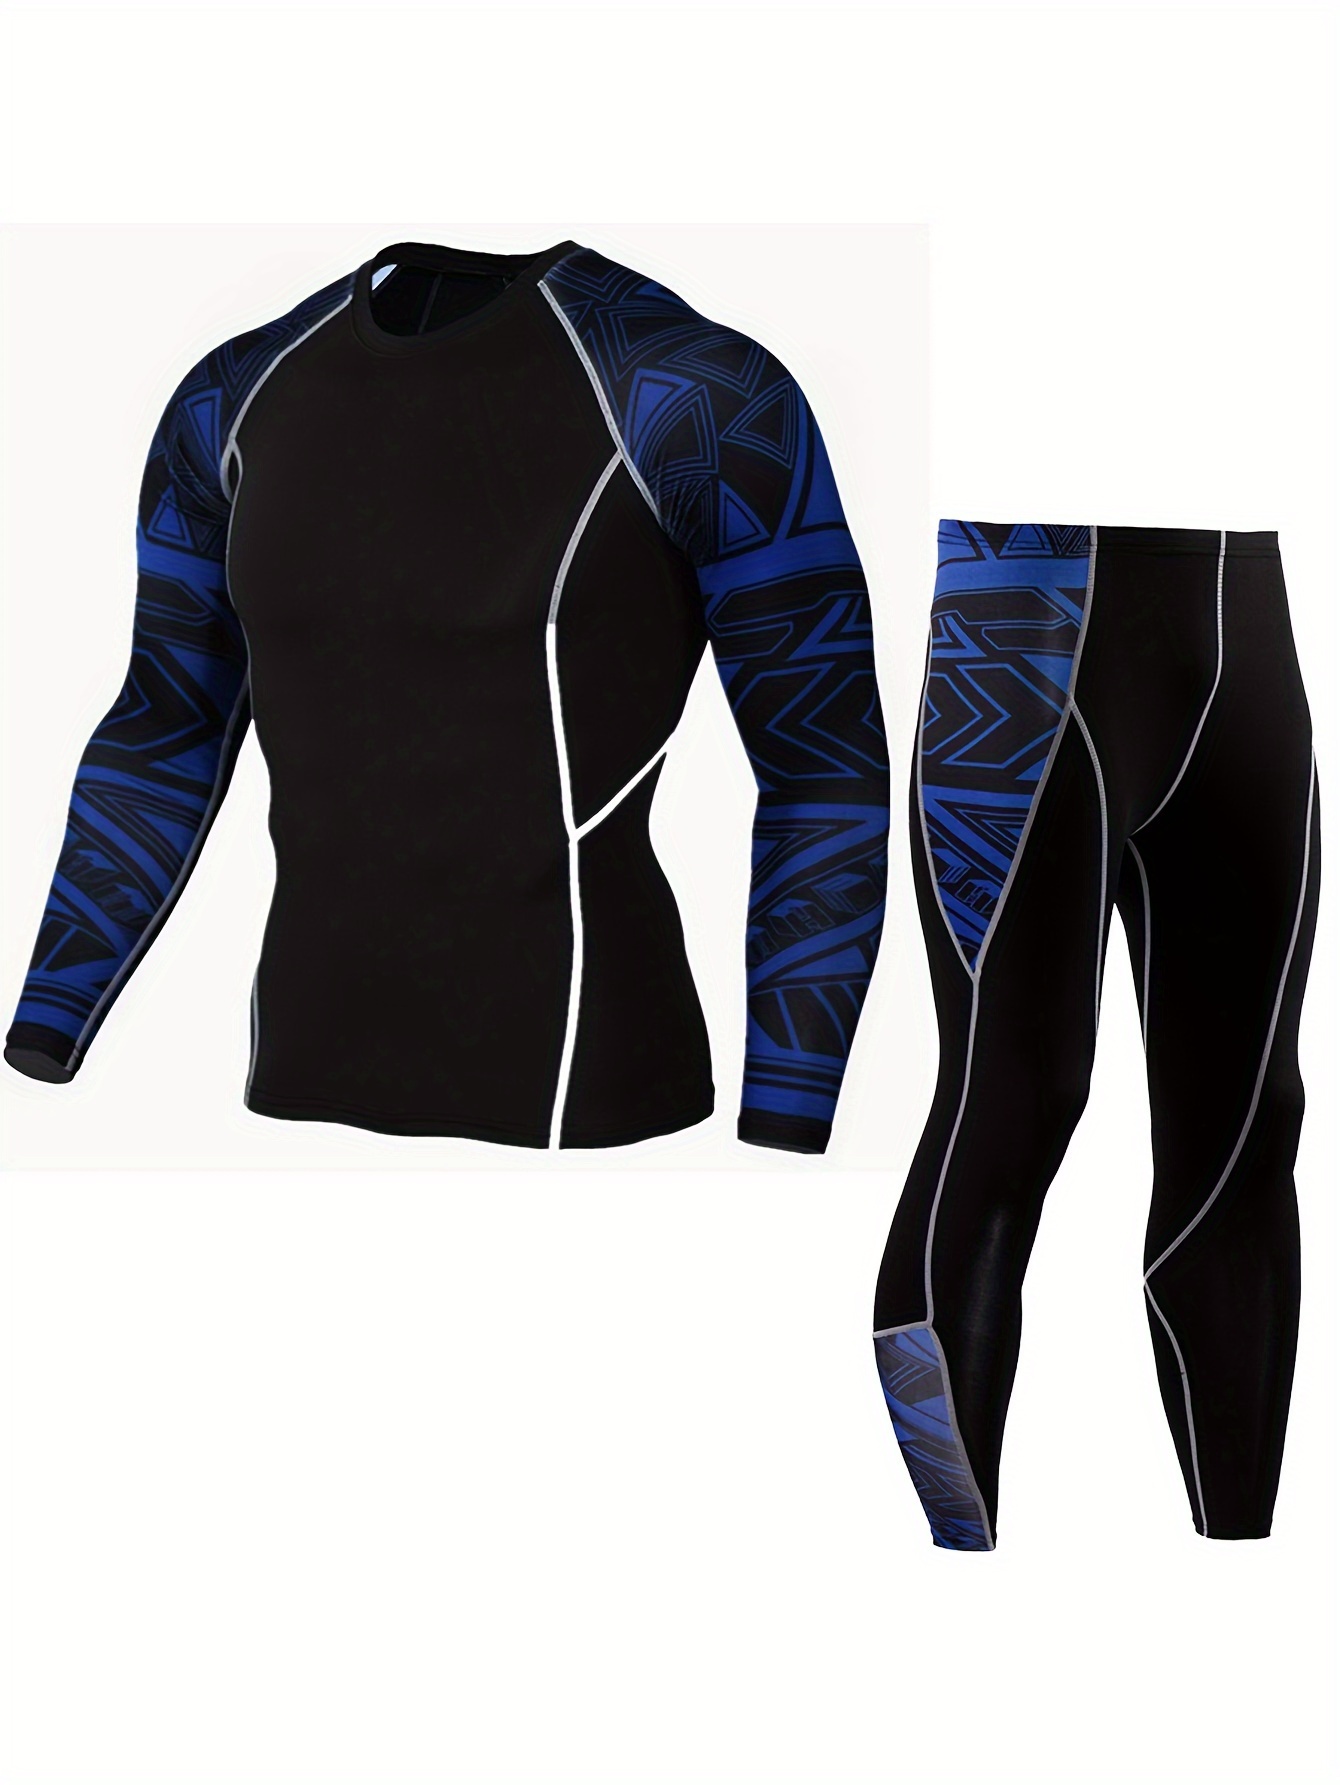 Men's Compression Underwear Sports Second Skin Track Suit Quick Drying  Winter Warm Base Layer Jogging Fitness Tights Workout Set